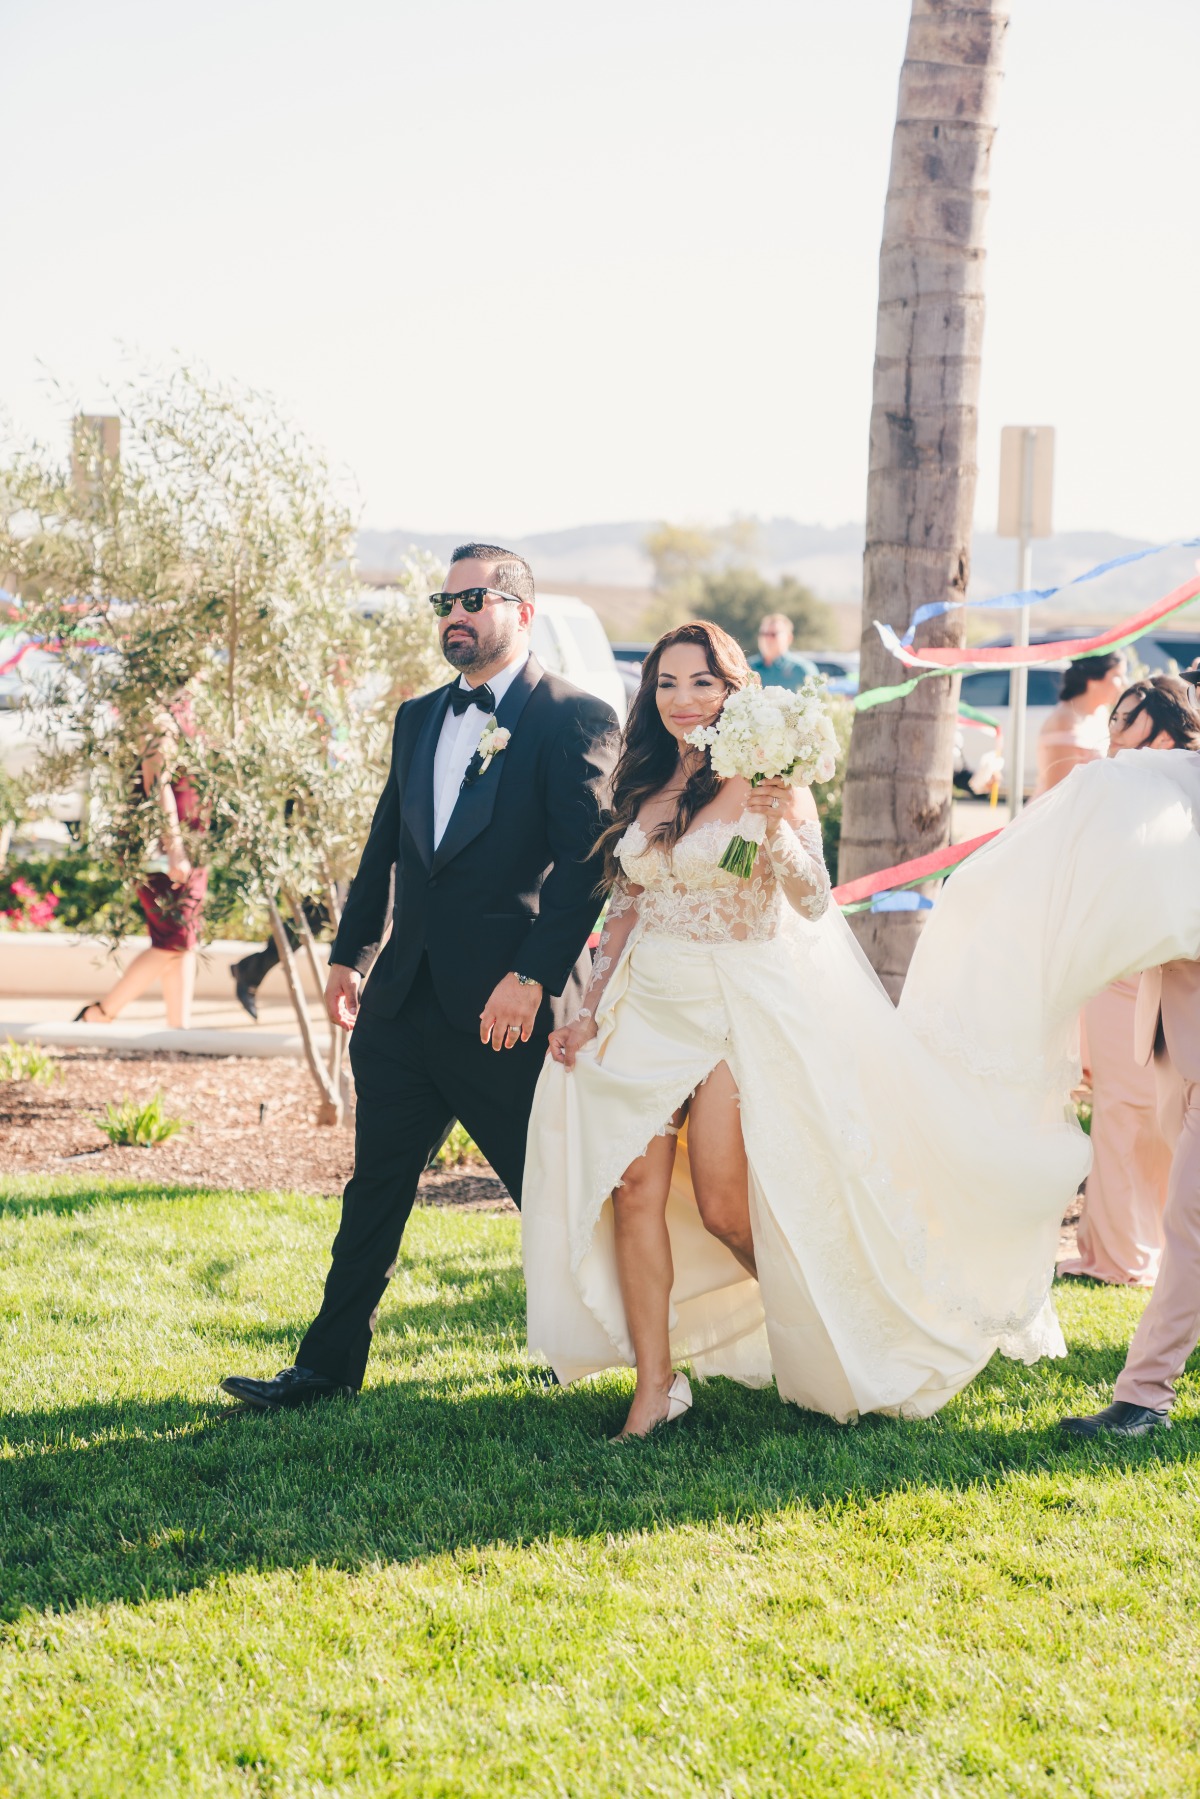 Romantic Wedding with Unique Mexican Traditions at Spanish-Inspired Venue